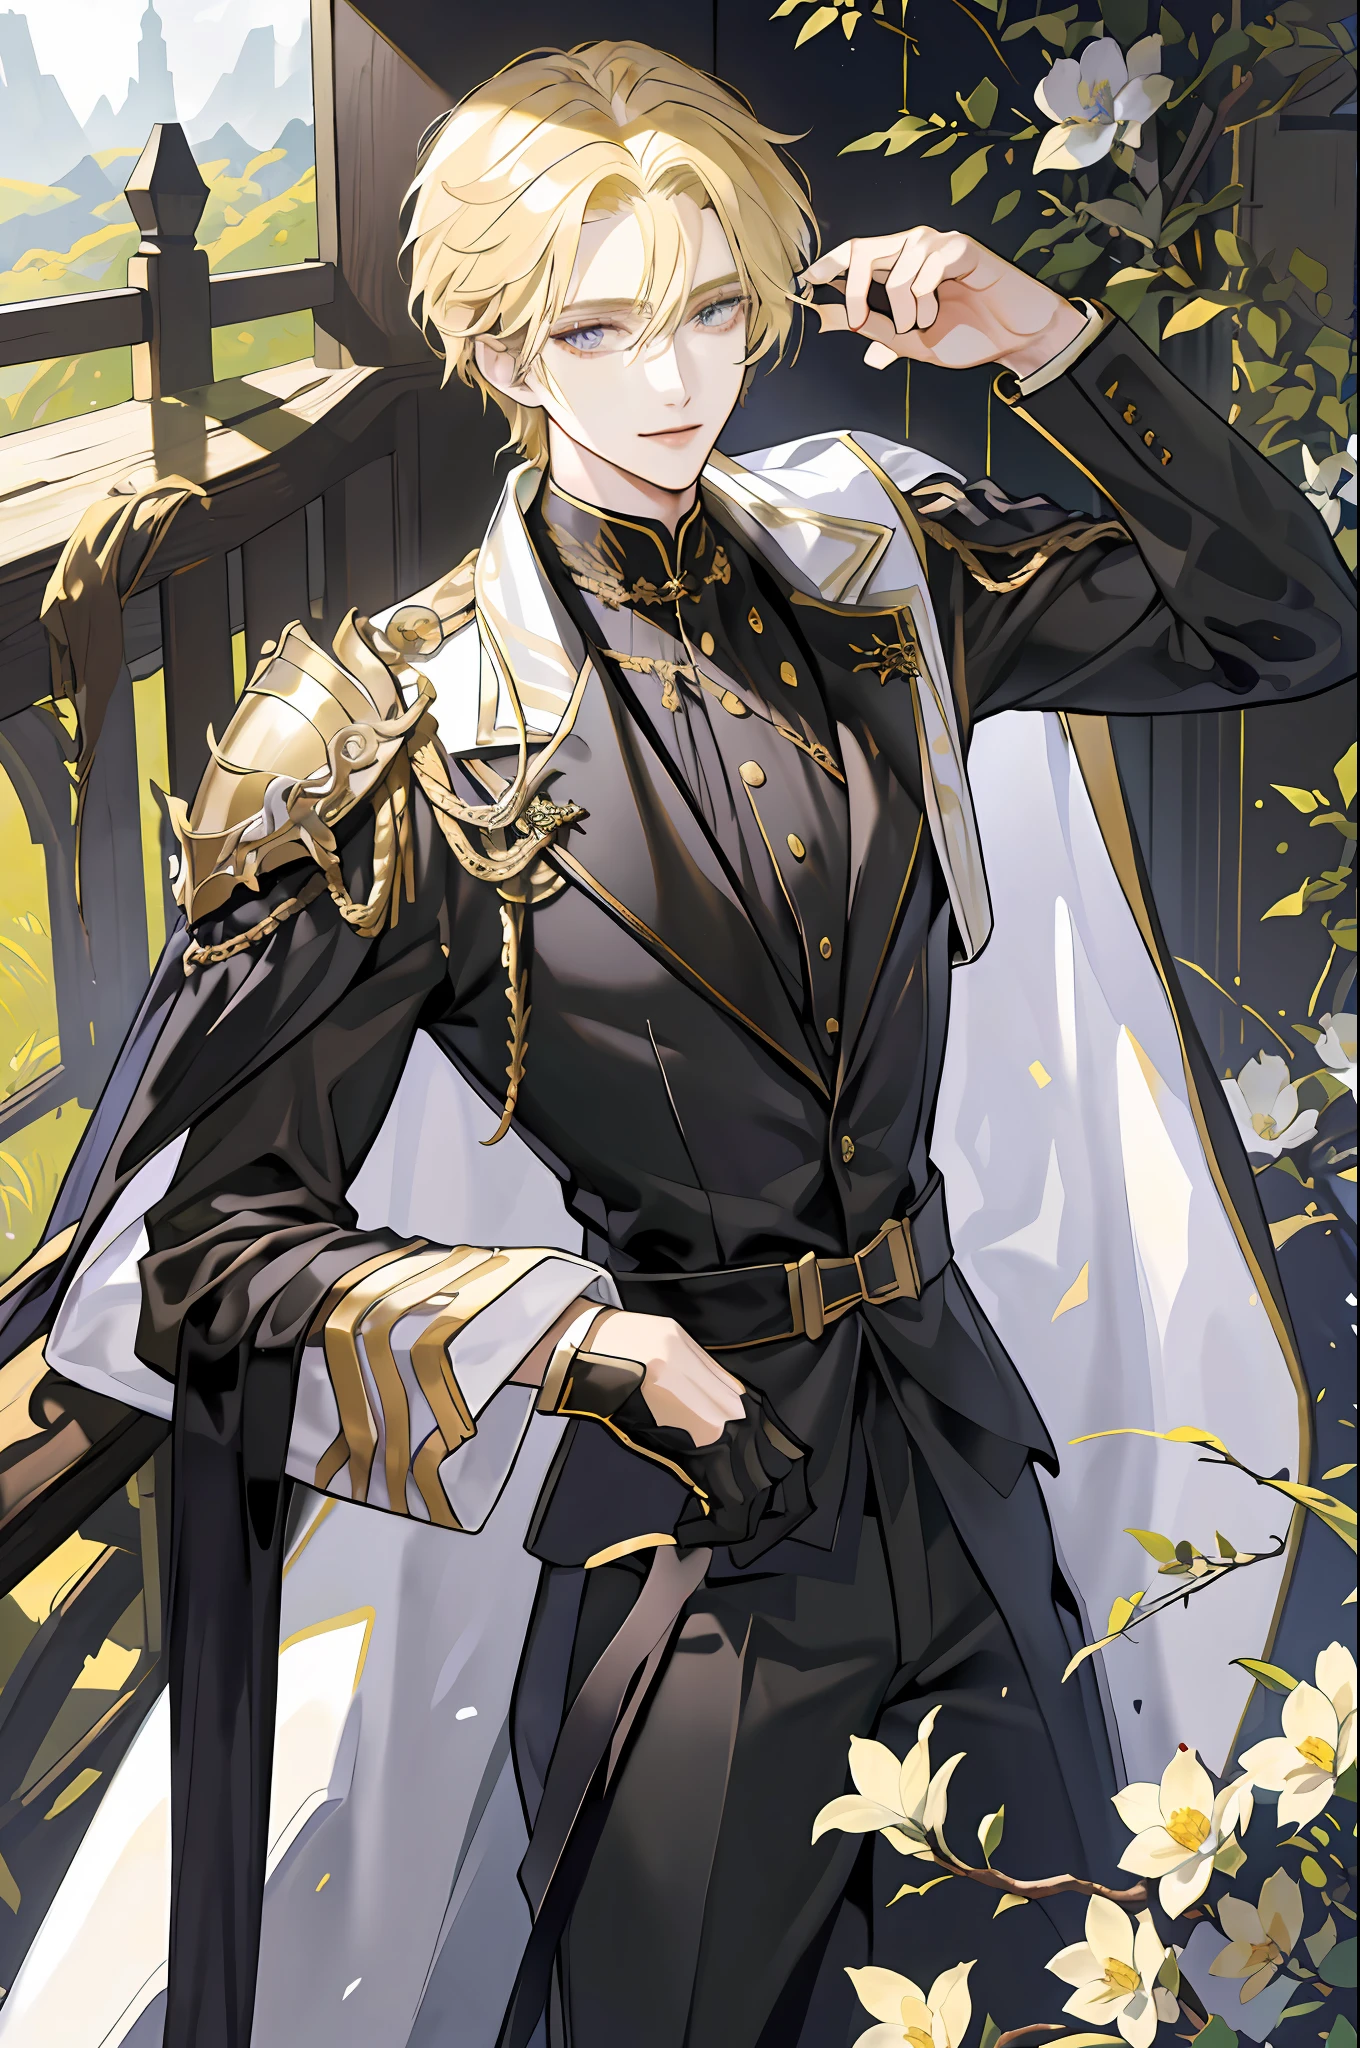 ((Masterpiece: 1.2, best quality)), ((2 men)), long blond hair, golden eyes (handsome: 1.4), white suit, uniform, royalty, (strong black knight, 30 years old, short black hair, scar on right eye, black armor), fantasy, forest, blooming flowers, sunlight, fantastic light and shadow, landscape, highly detailed face, portrait, smile